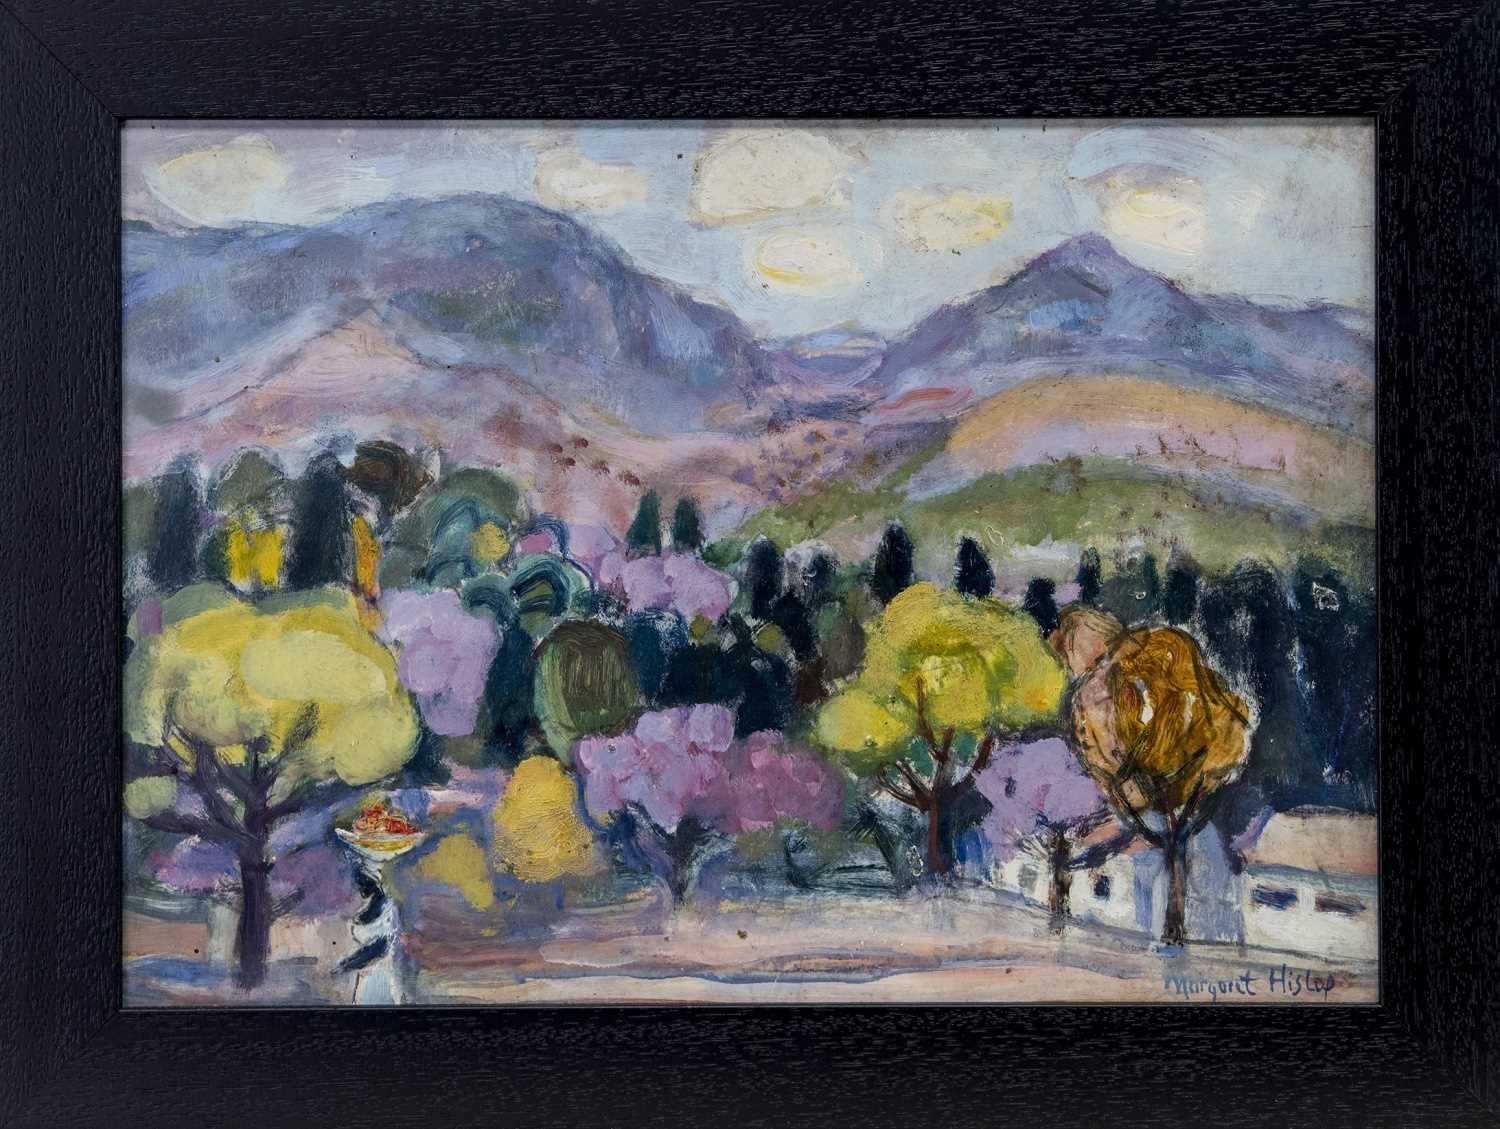 Lot 45 - THE FRUIT CARRIER, UMTALI, AN OIL BY MARGARET ROSS HISLOP